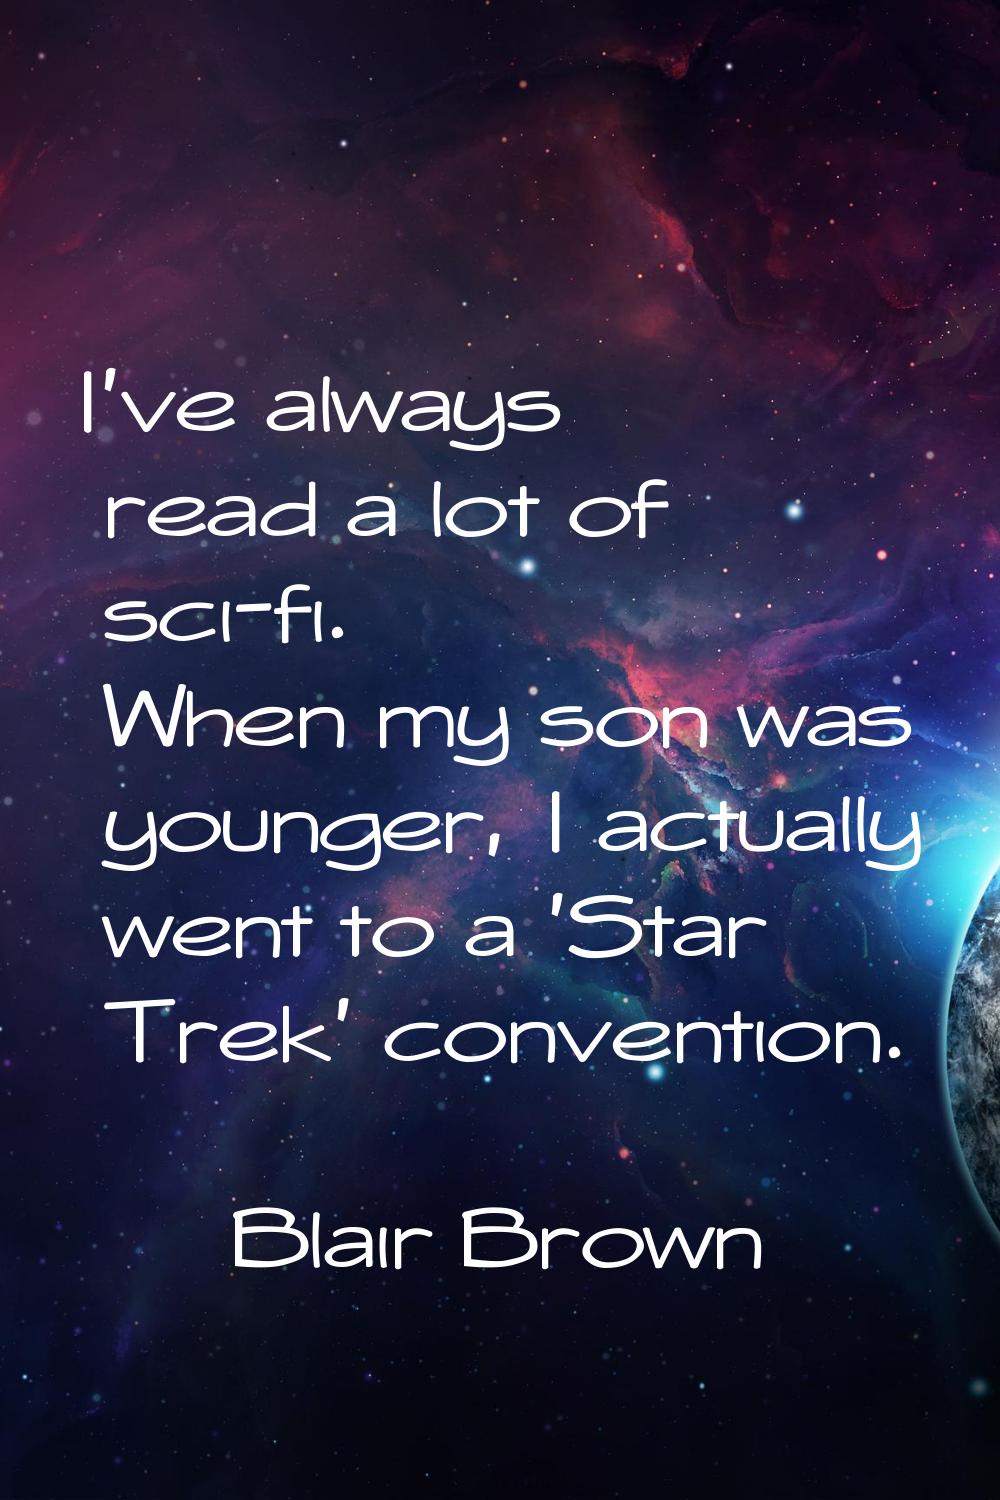 I've always read a lot of sci-fi. When my son was younger, I actually went to a 'Star Trek' convent